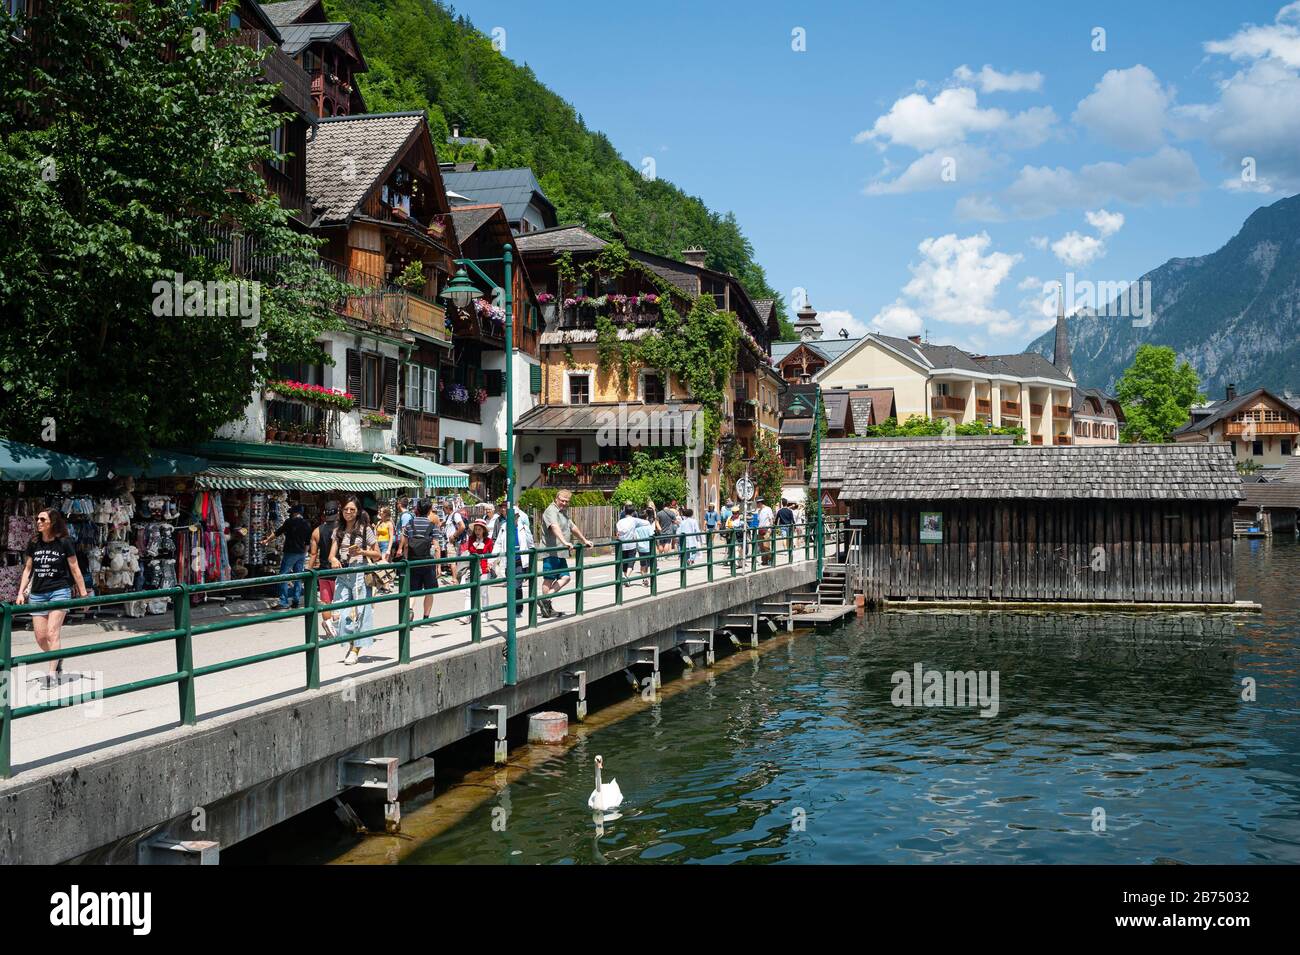 18.06.2019, Hallstatt, Upper Austria, Austria, Europe - tourists on the shores of Lake Hallstatt. The place is a favorite travel destination of Chinese and exists as a replica in the Guangdong province in China. [automated translation] Stock Photo